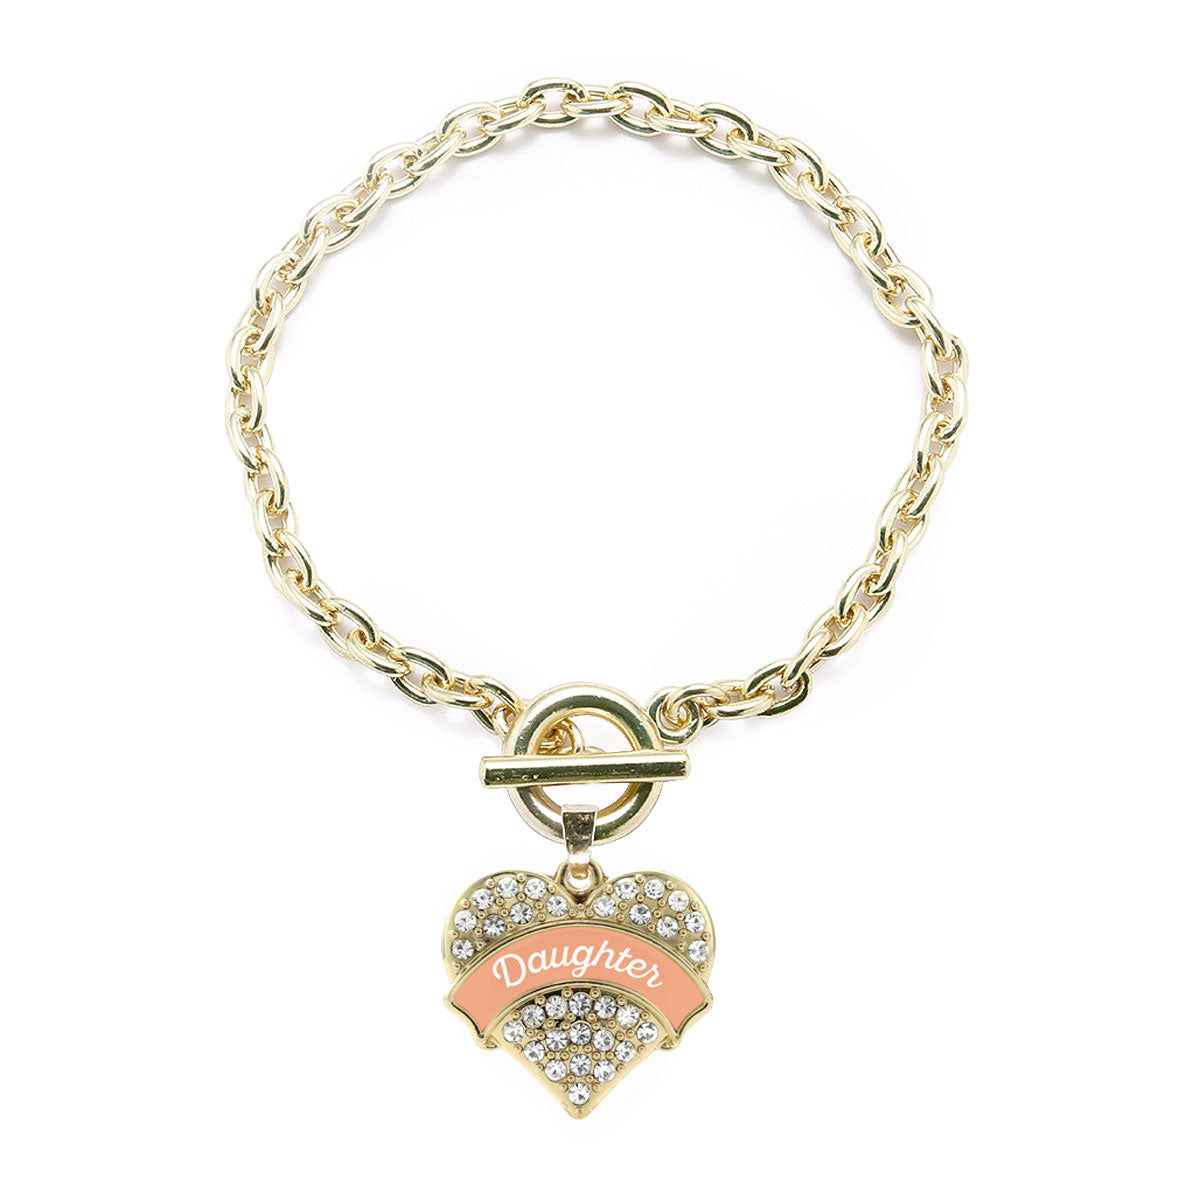 Gold Peach Daughter Pave Heart Charm Toggle Bracelet